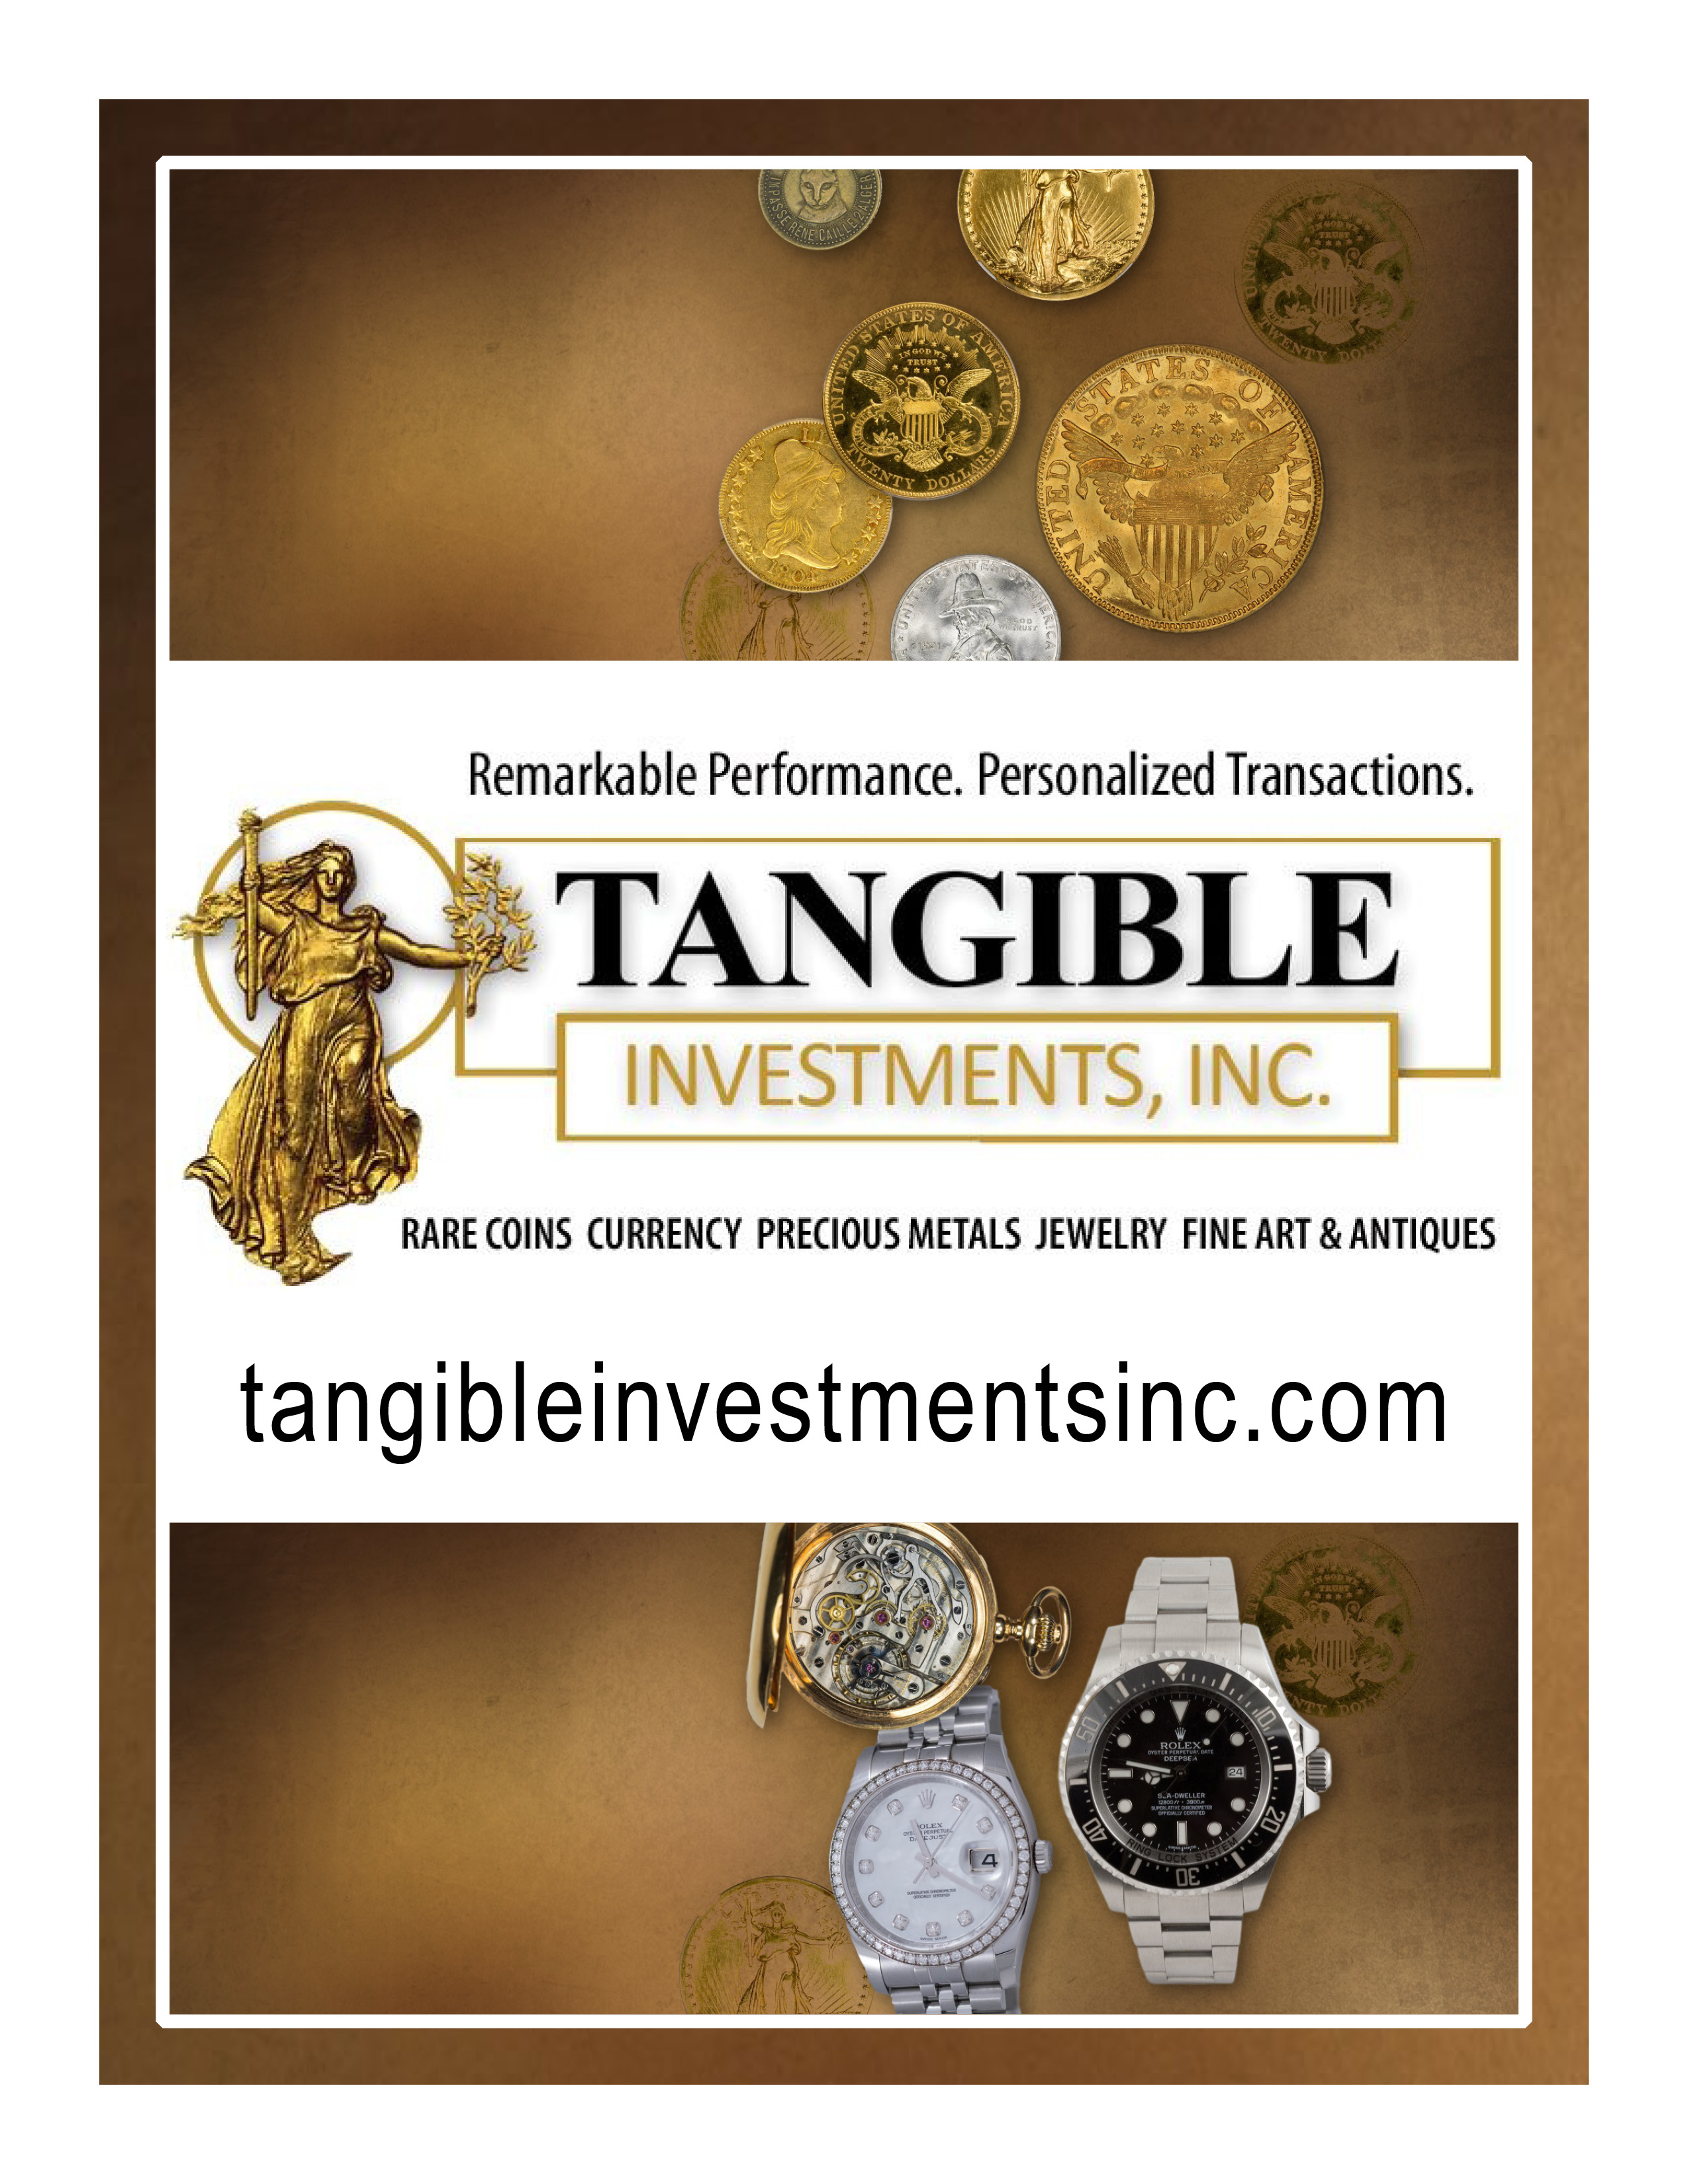 Tangible Investments